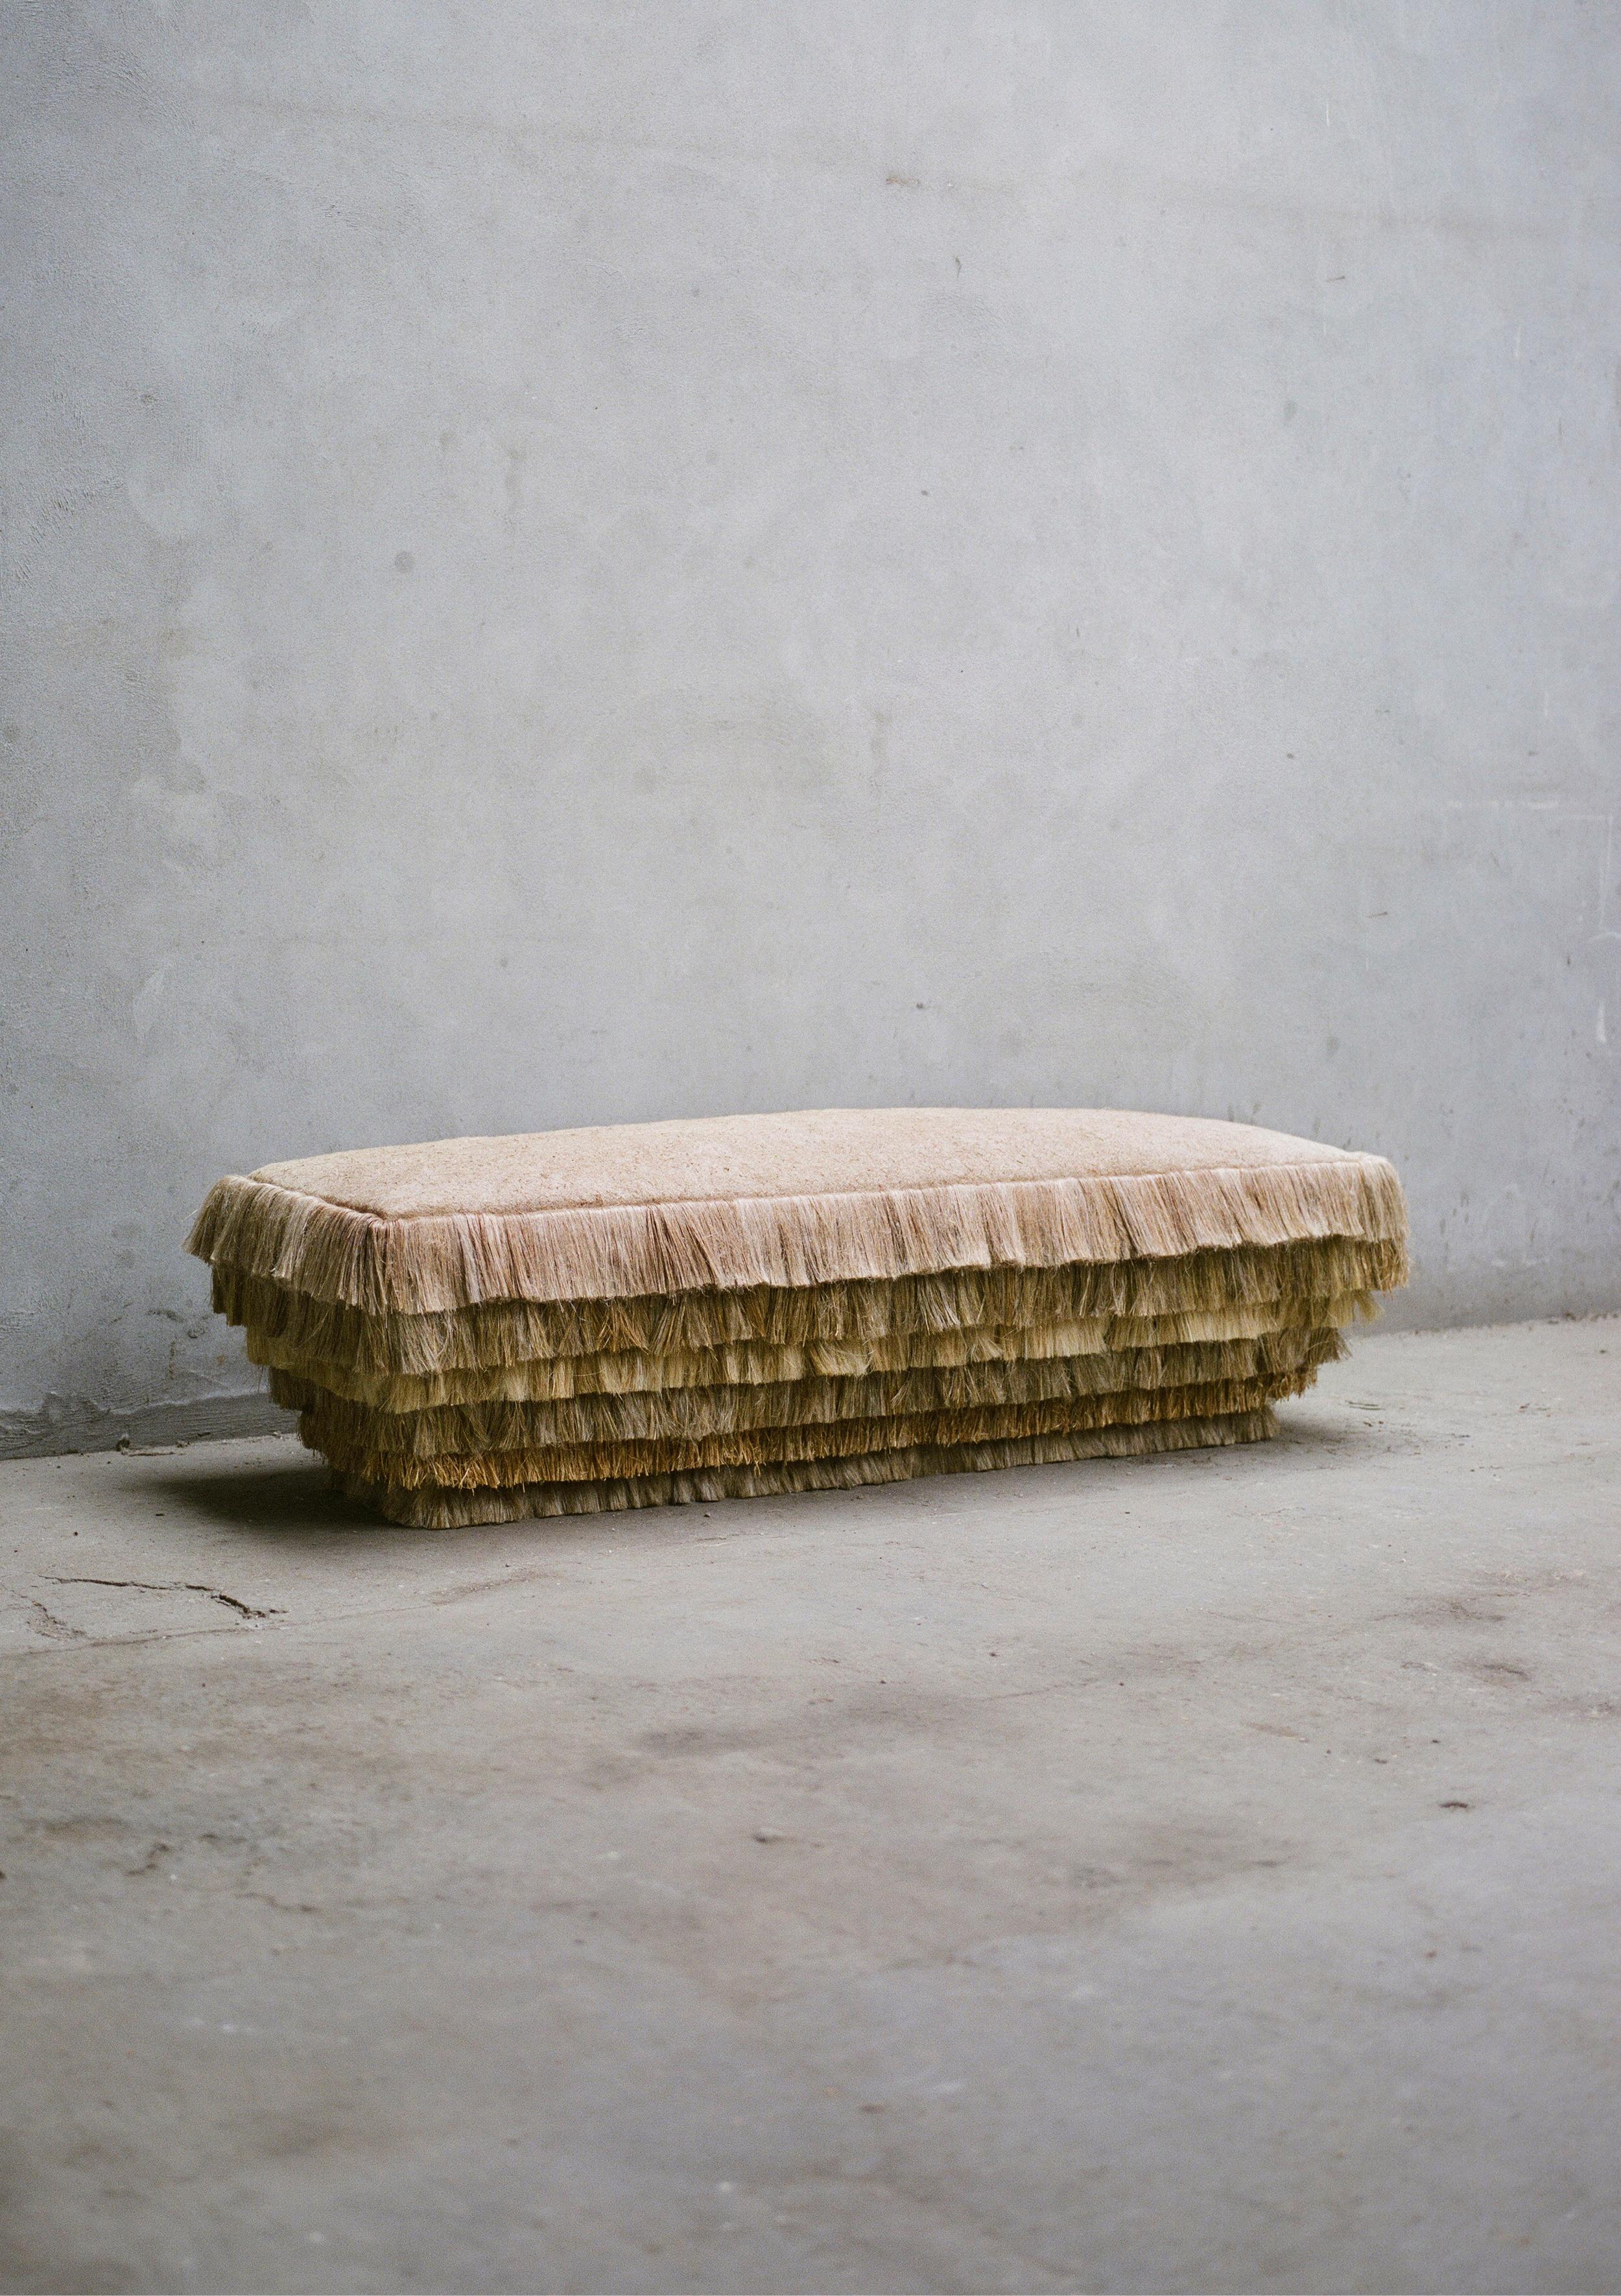 The flax bench is part of L'écoucheur collection, valuing the natural expressivity of flax at its raw state. By working directly with the primary scutched fibers, this project aims to presents new aspects, tactilities and properties of linen, often